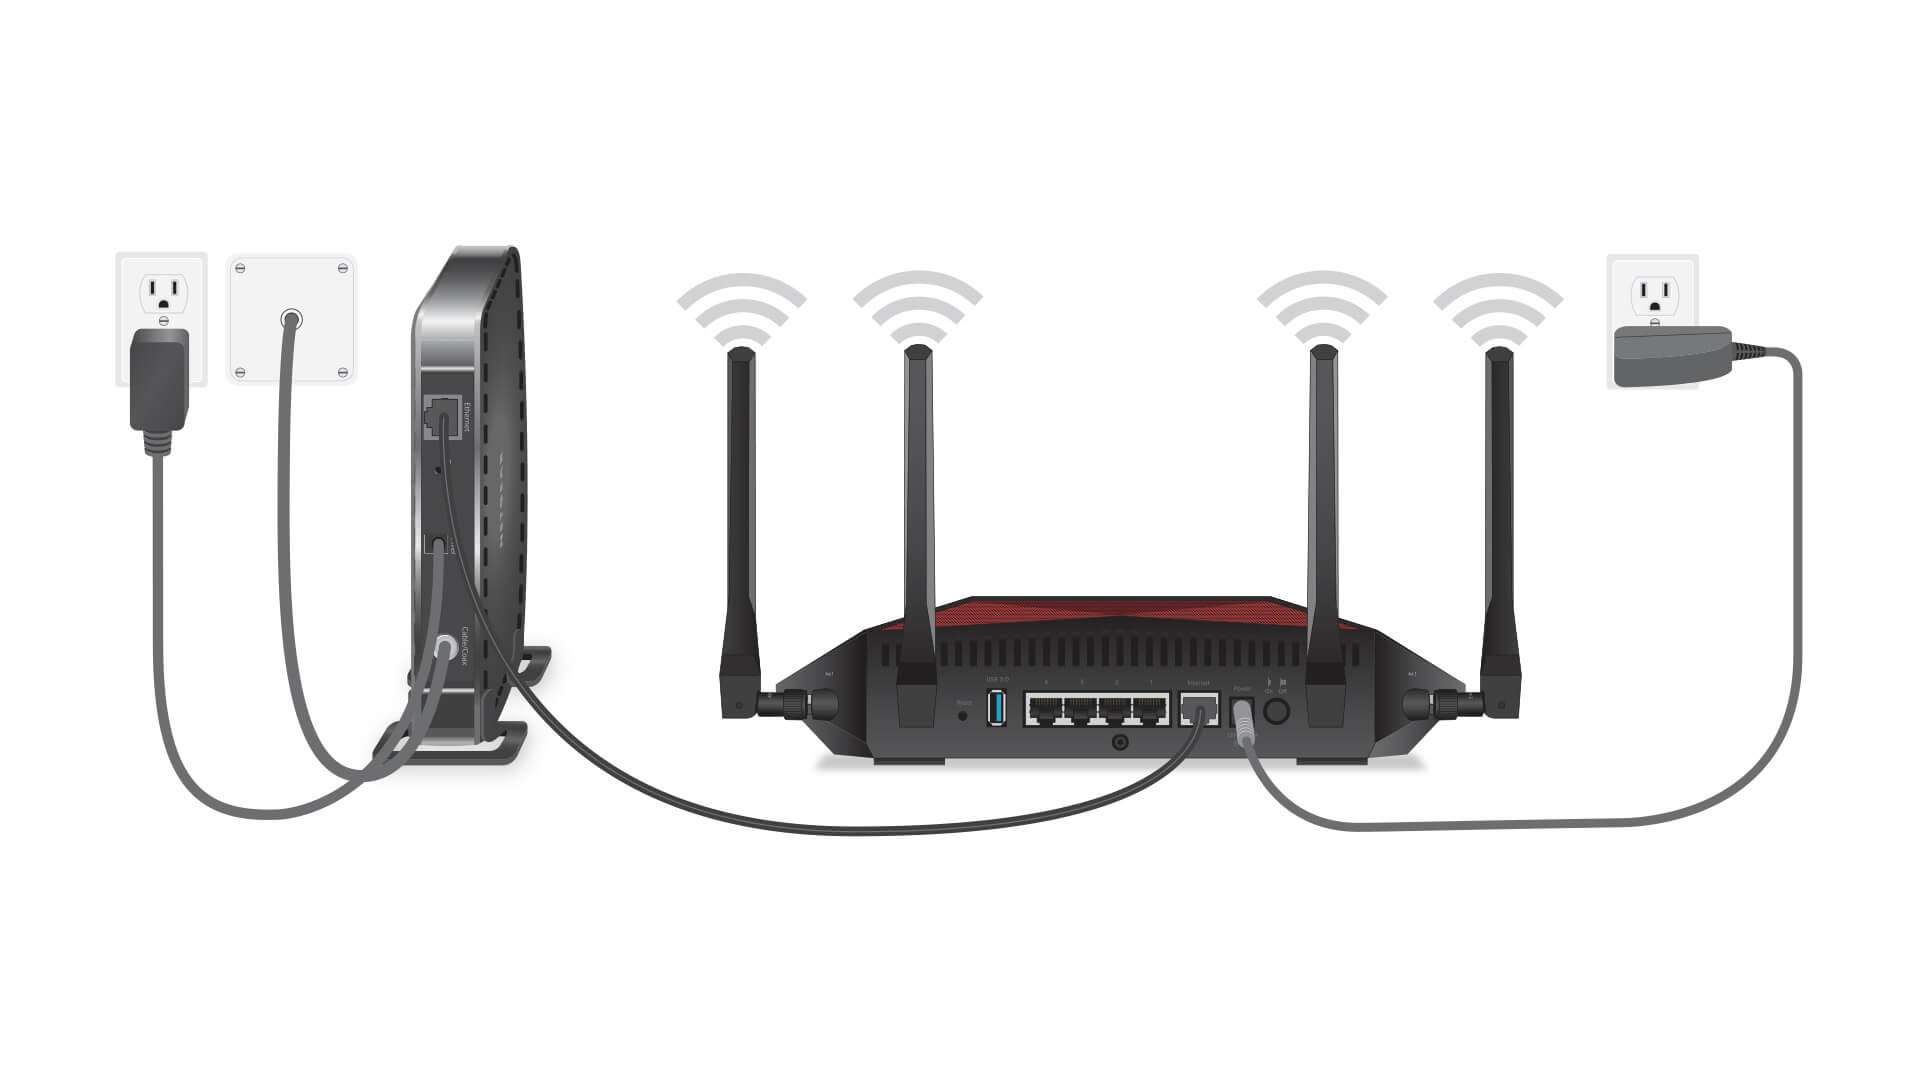 får temperament Net How To Set Up Your WiFi Router For Gaming